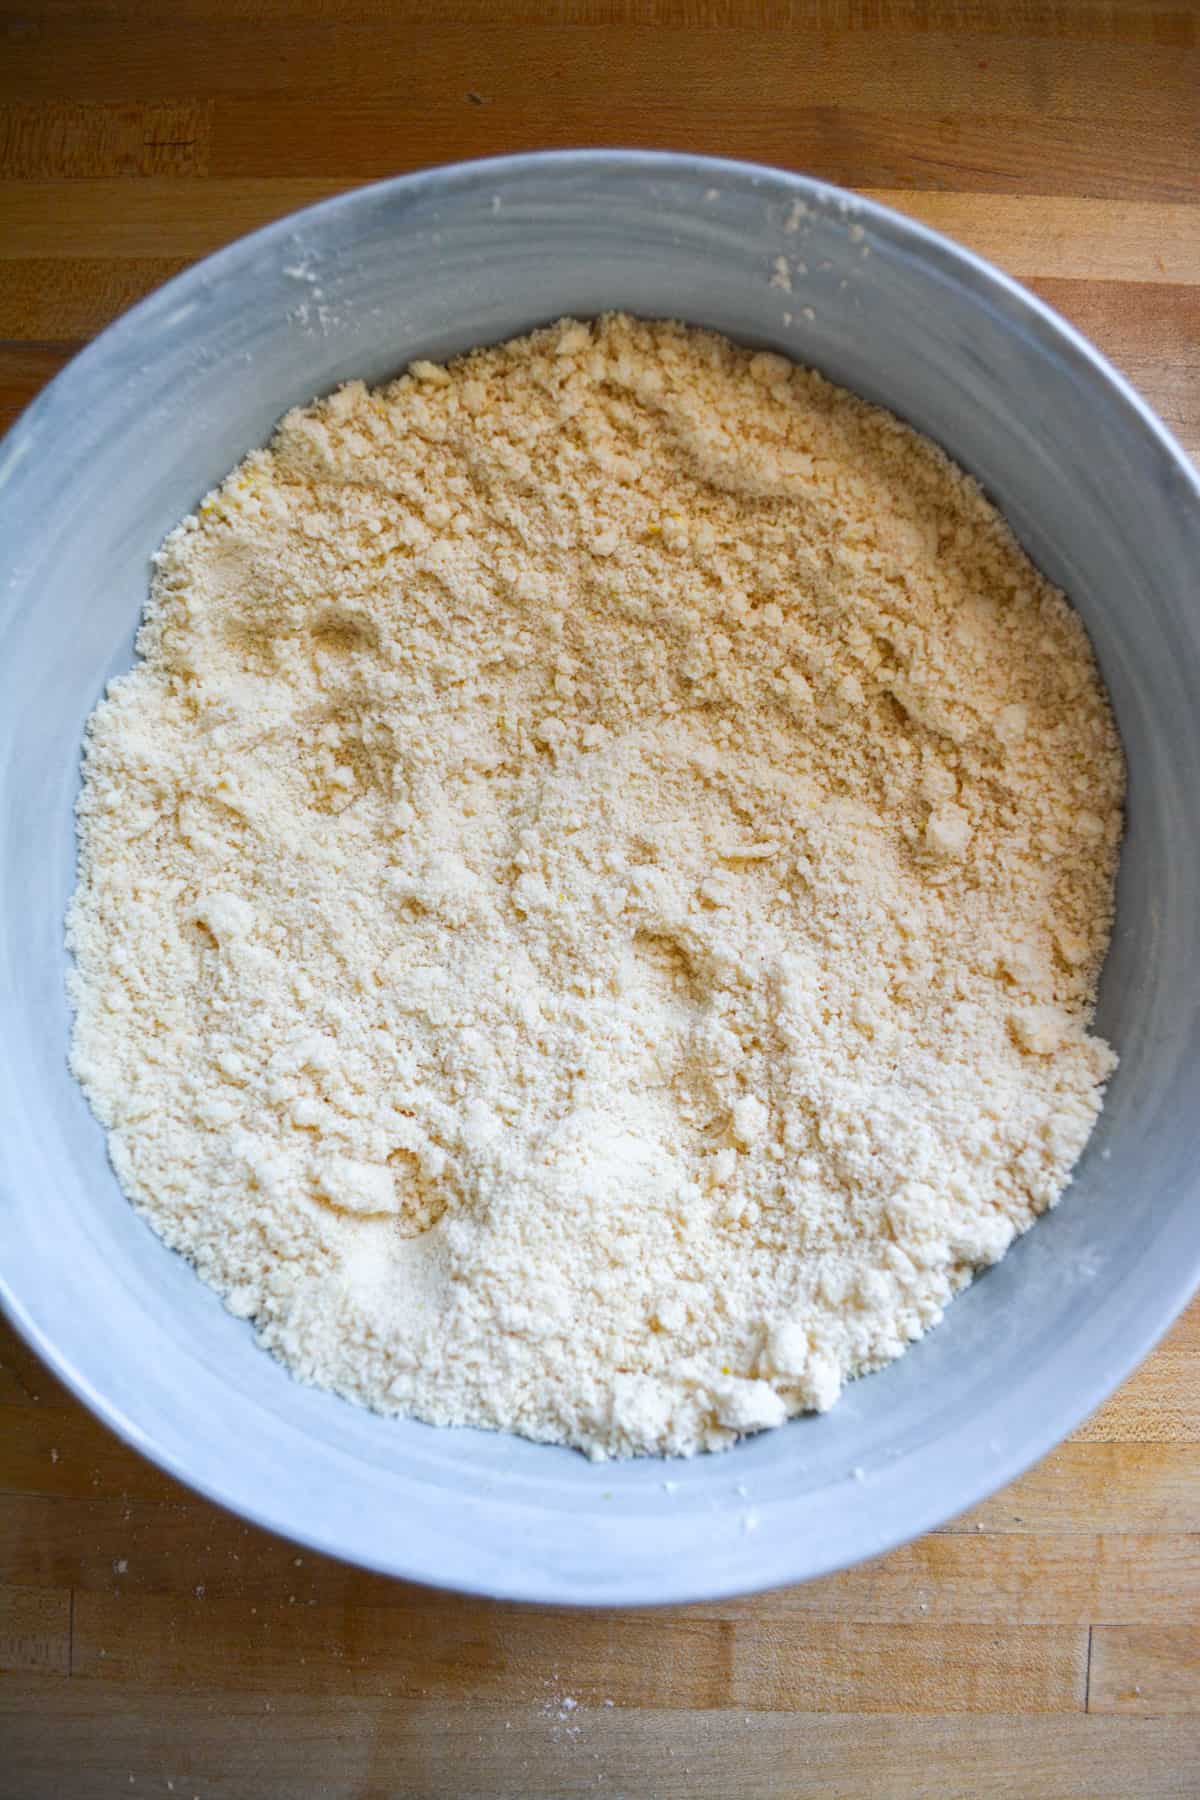 Dairy-free butter cut into the dry ingredients until the mixture looks like a coarse meal.